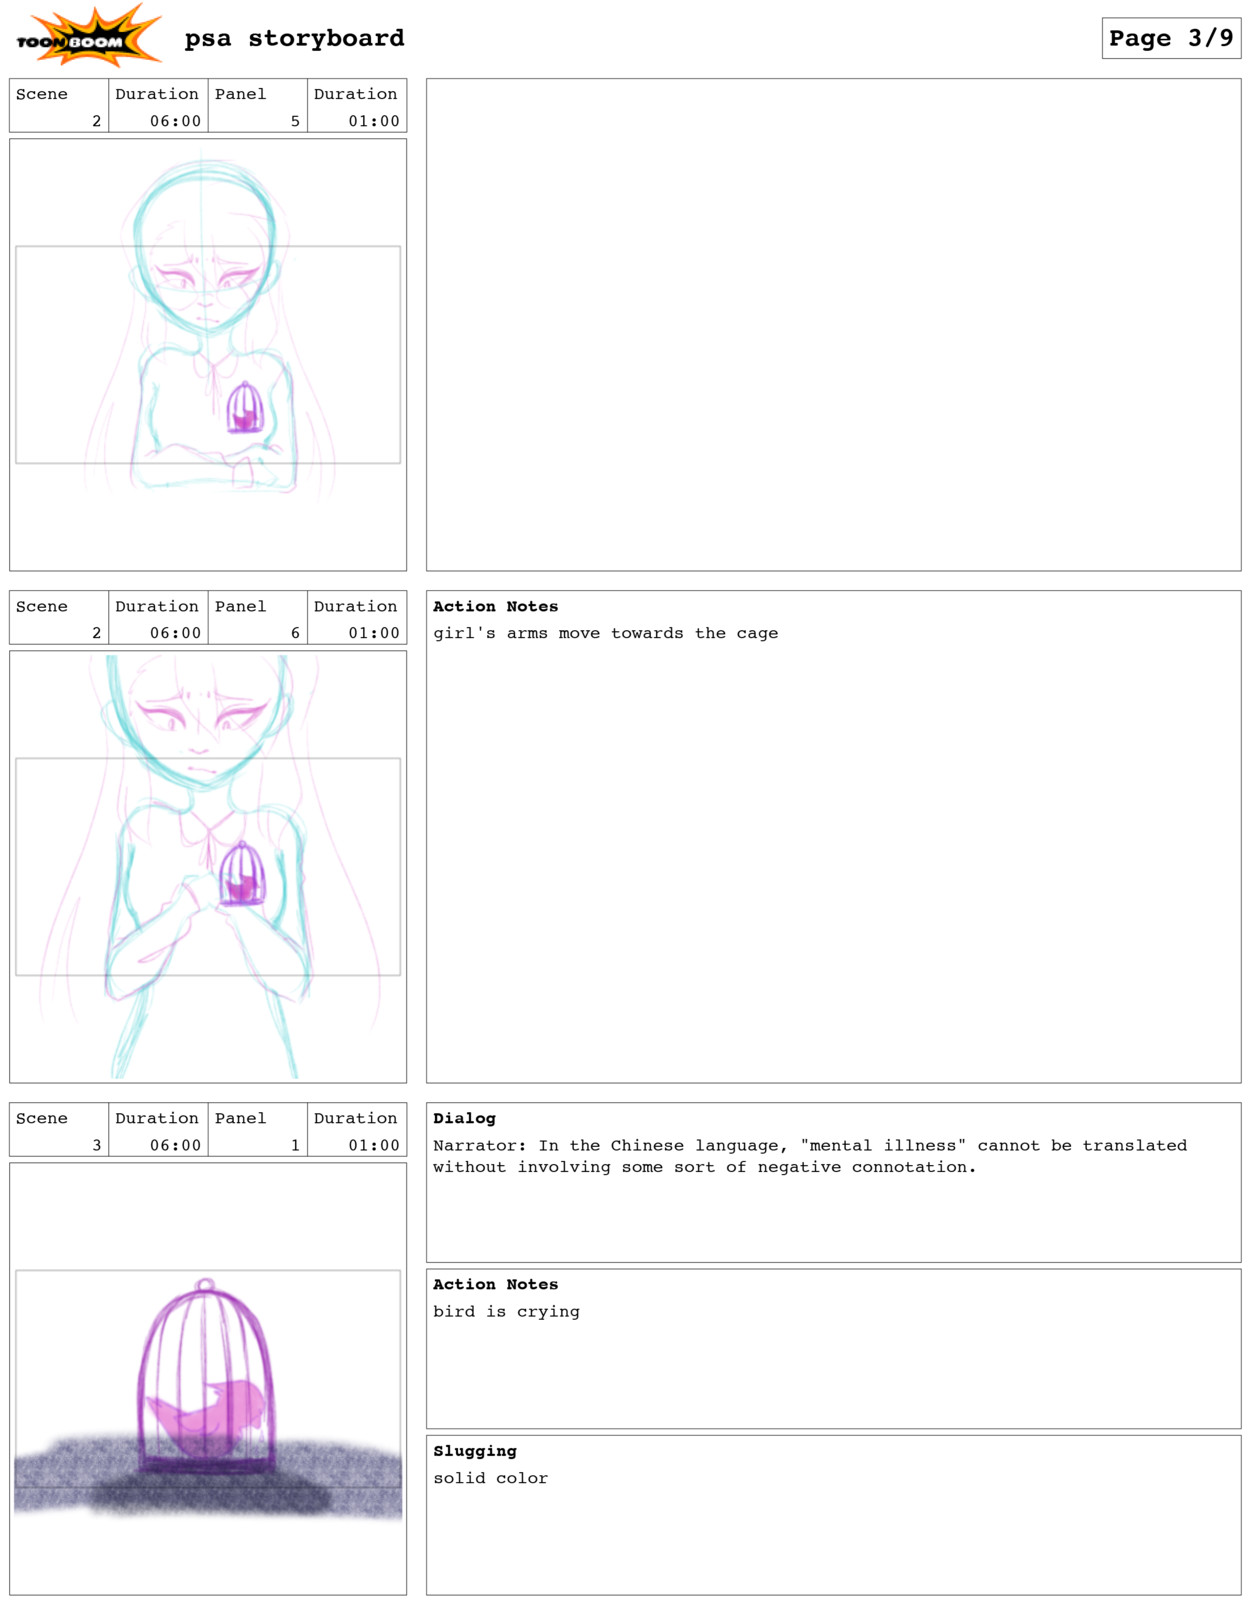 Page 3 of storyboard.